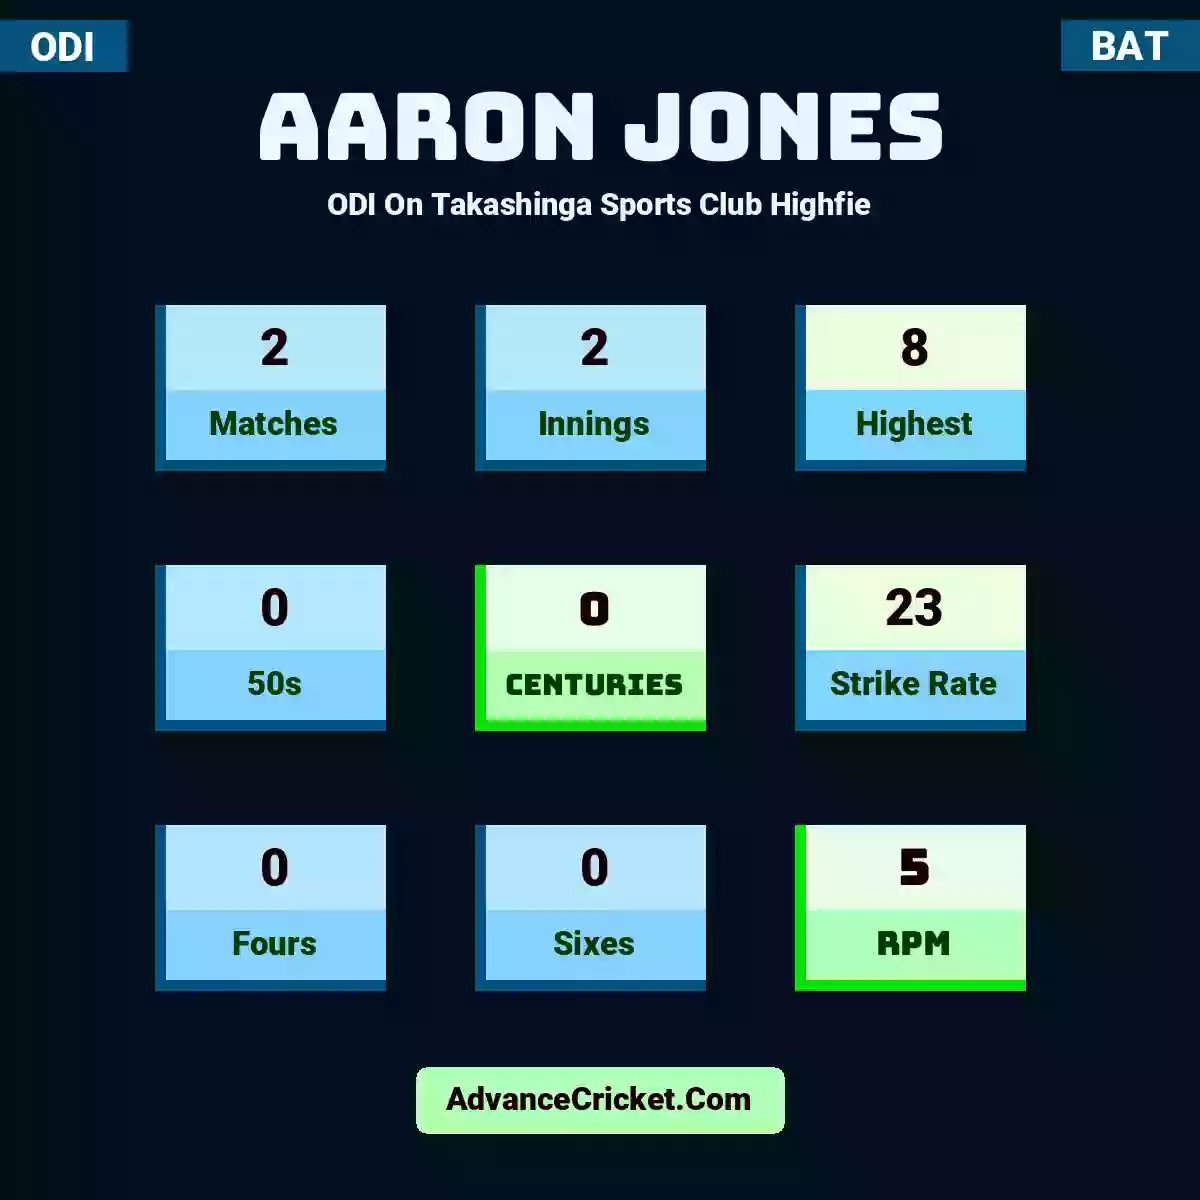 Aaron Jones ODI  On Takashinga Sports Club Highfie, Aaron Jones played 2 matches, scored 8 runs as highest, 0 half-centuries, and 0 centuries, with a strike rate of 23. A.Jones hit 0 fours and 0 sixes, with an RPM of 5.